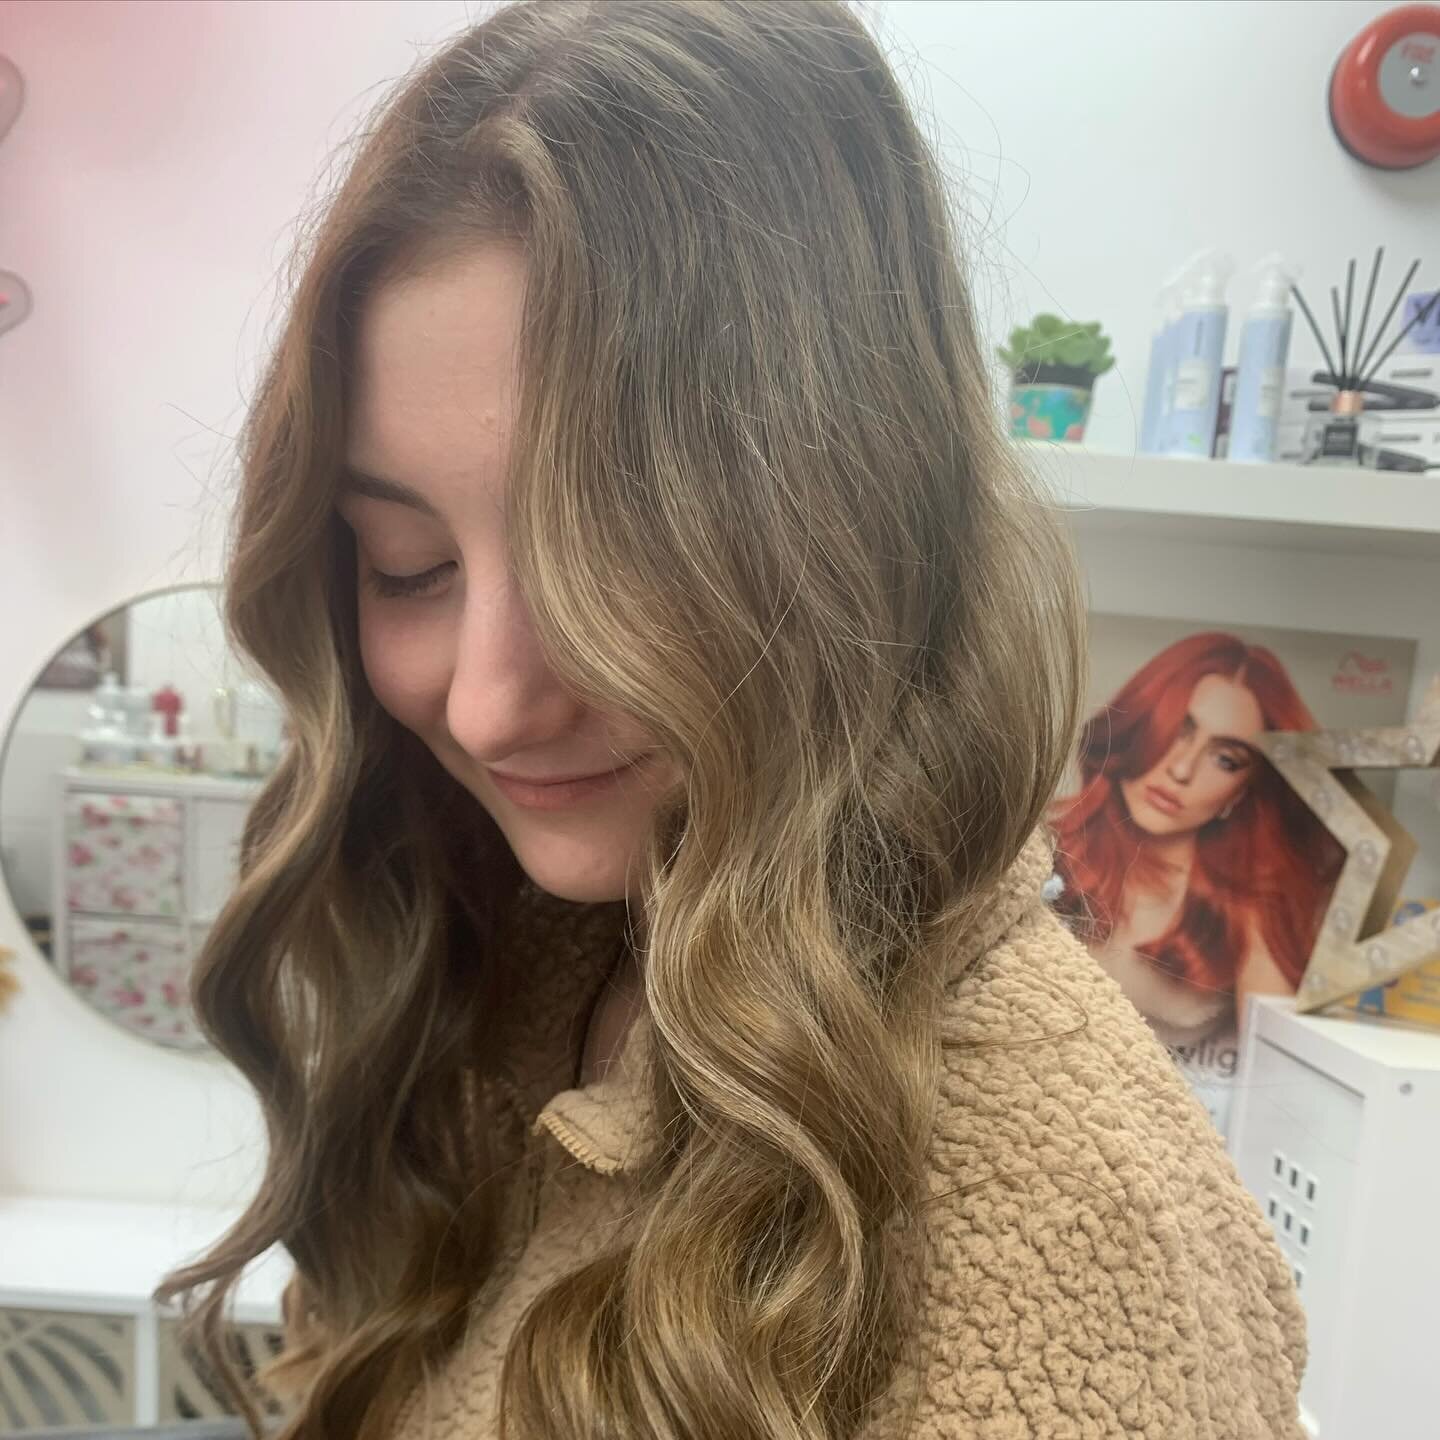 Winter Warmer

Toning down to a more natural vibe ✌🏻🍂🤎
Book your next appointment now
.
.
.
#wella #wellahair #brunette #brunettehair #lattehair #faceframinghighlights #studiosalon #rebeccaealeshairdressing